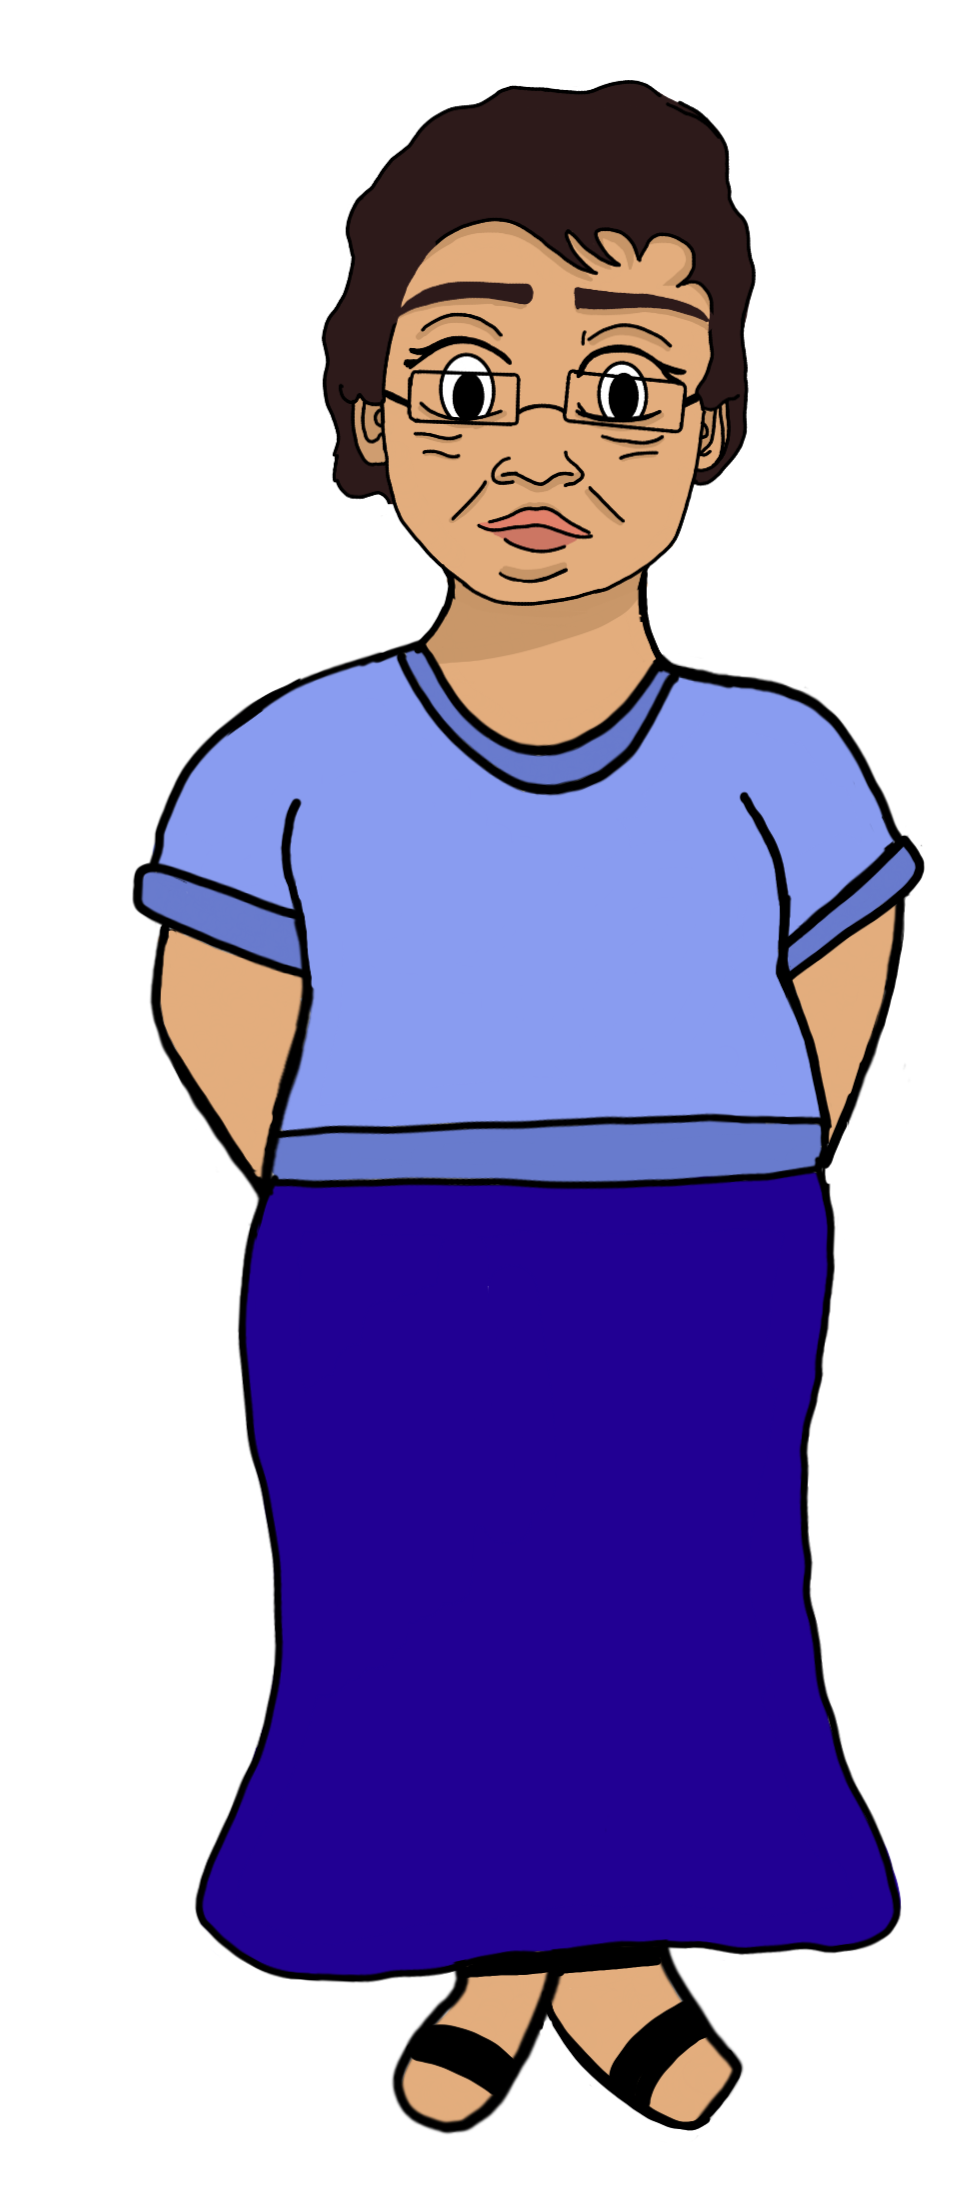 A full-length illustration of a cartoon woman with brown hair and glasses, wearing a blue t-shirt and a long purple skirt, standing against a black background.